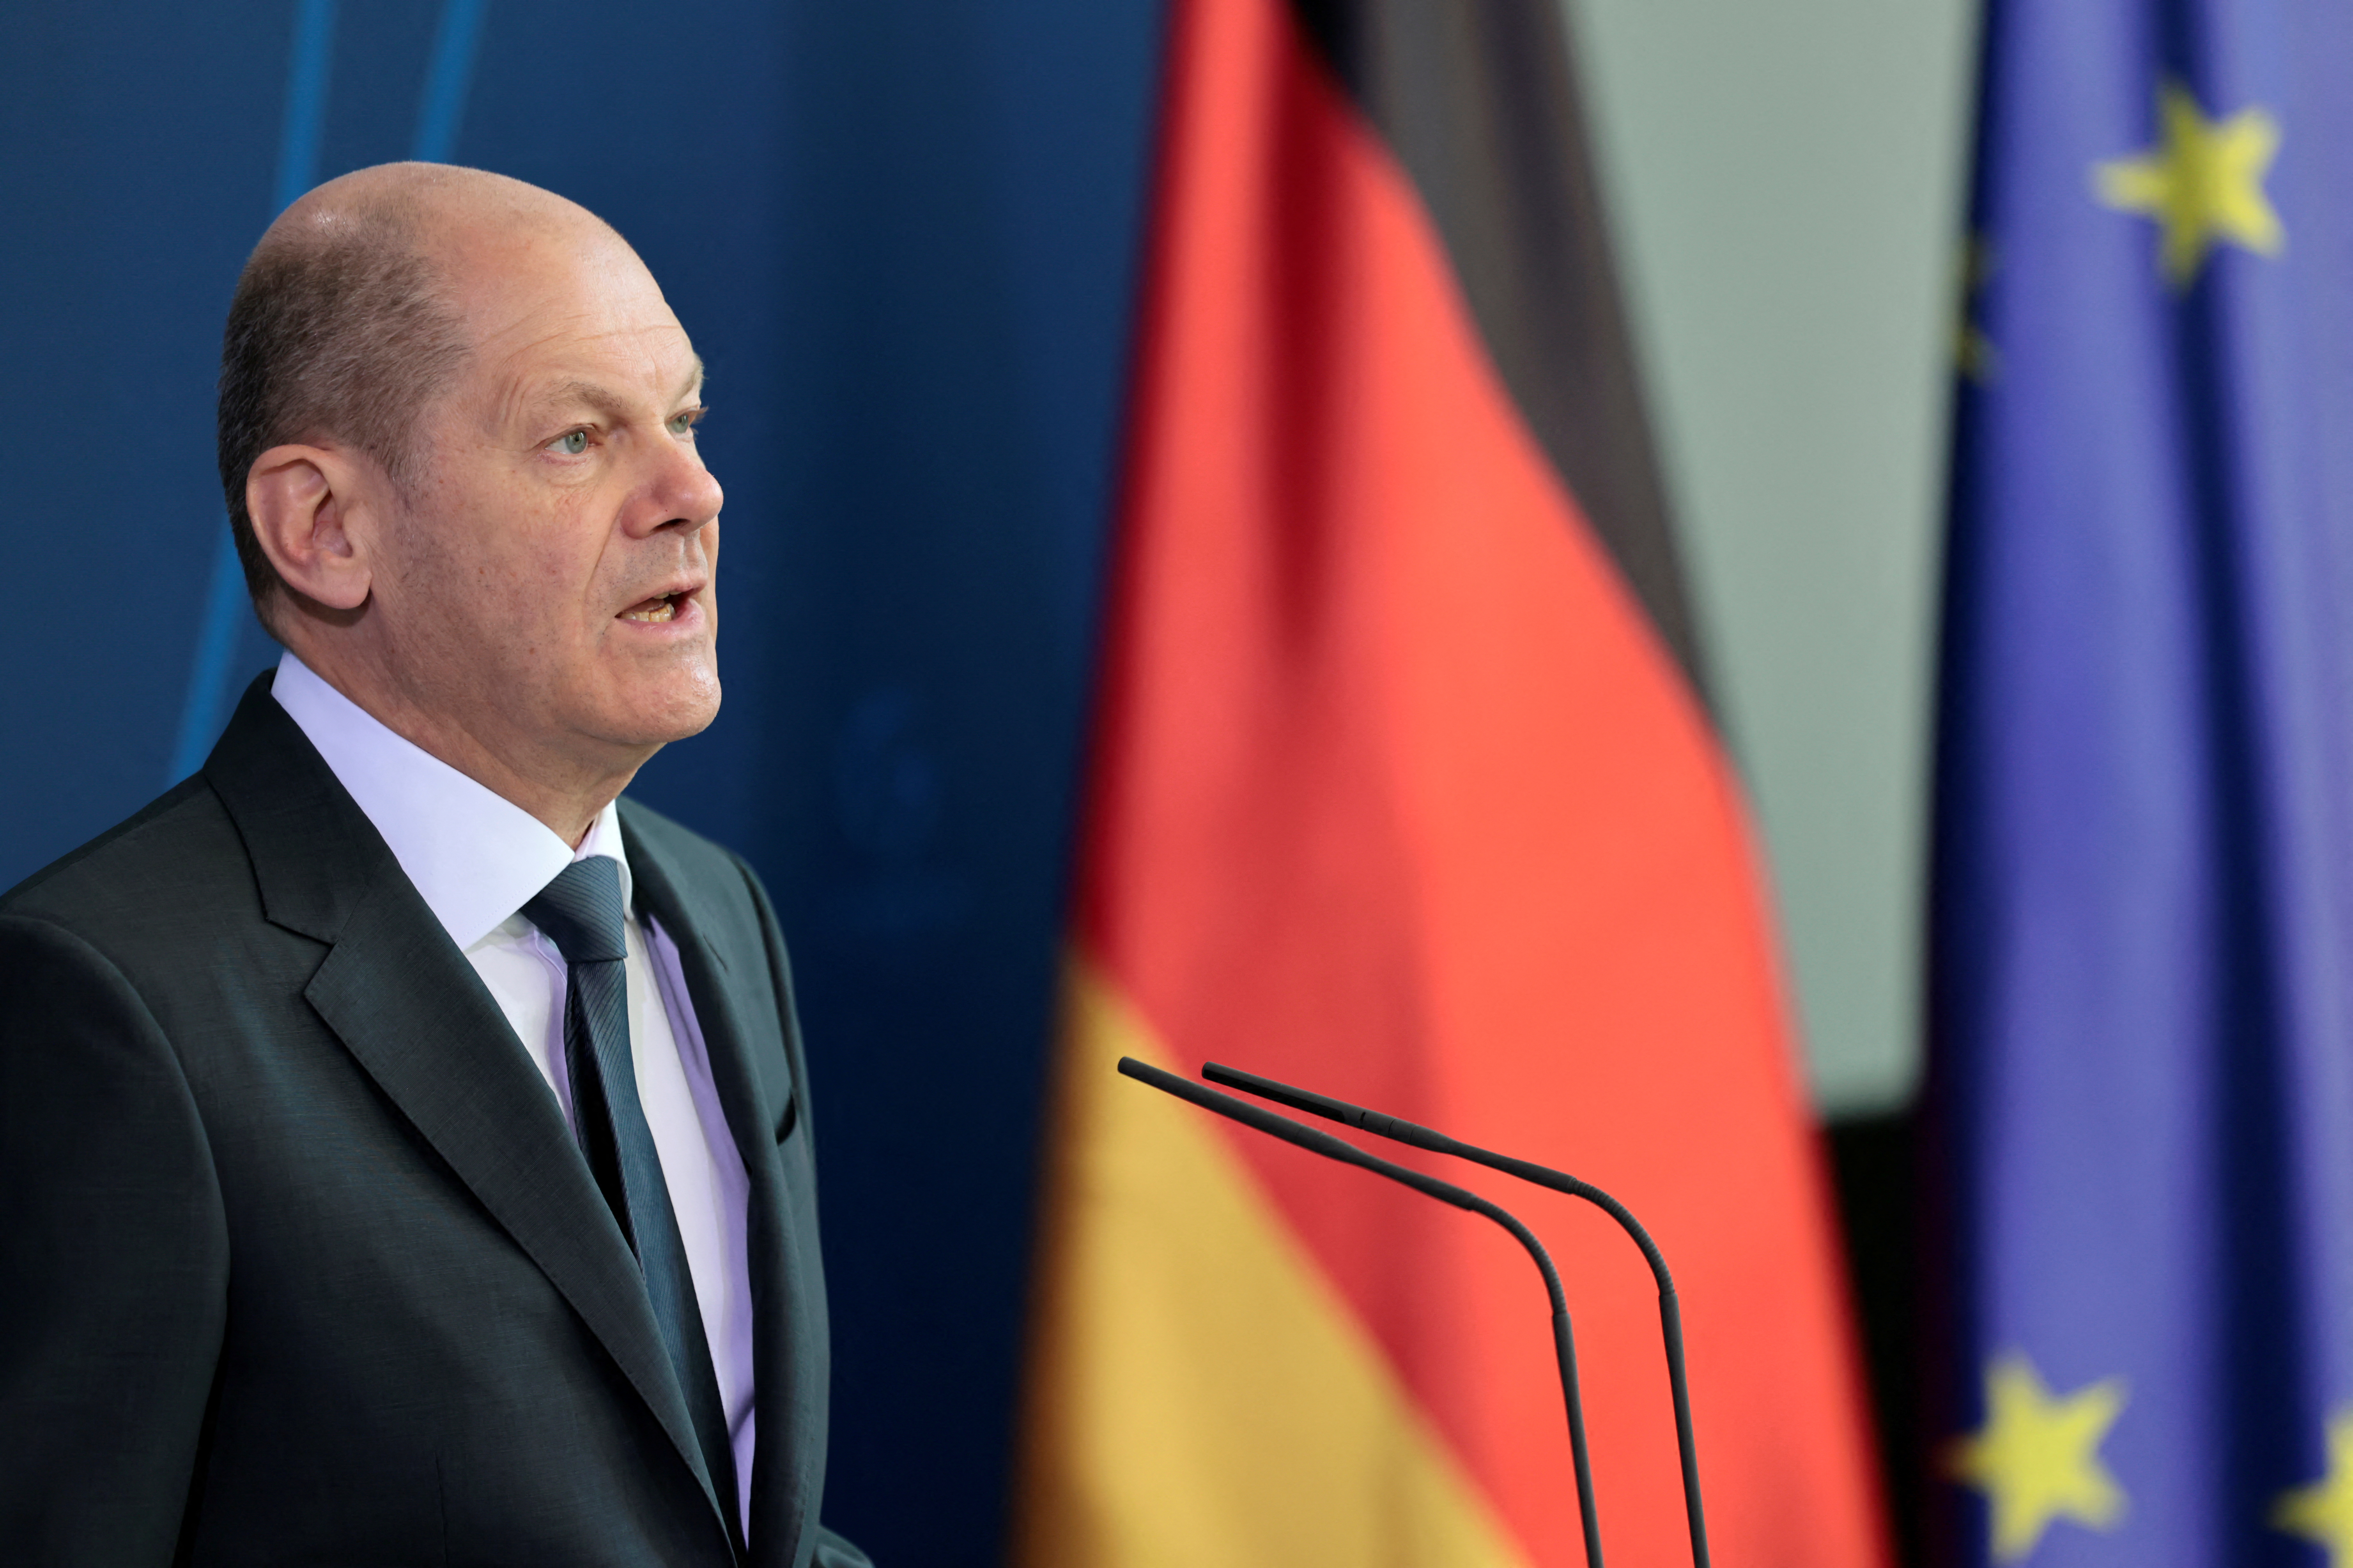 German Chancellor Olaf Scholz gives a press statement at the Chancellery in Berlin